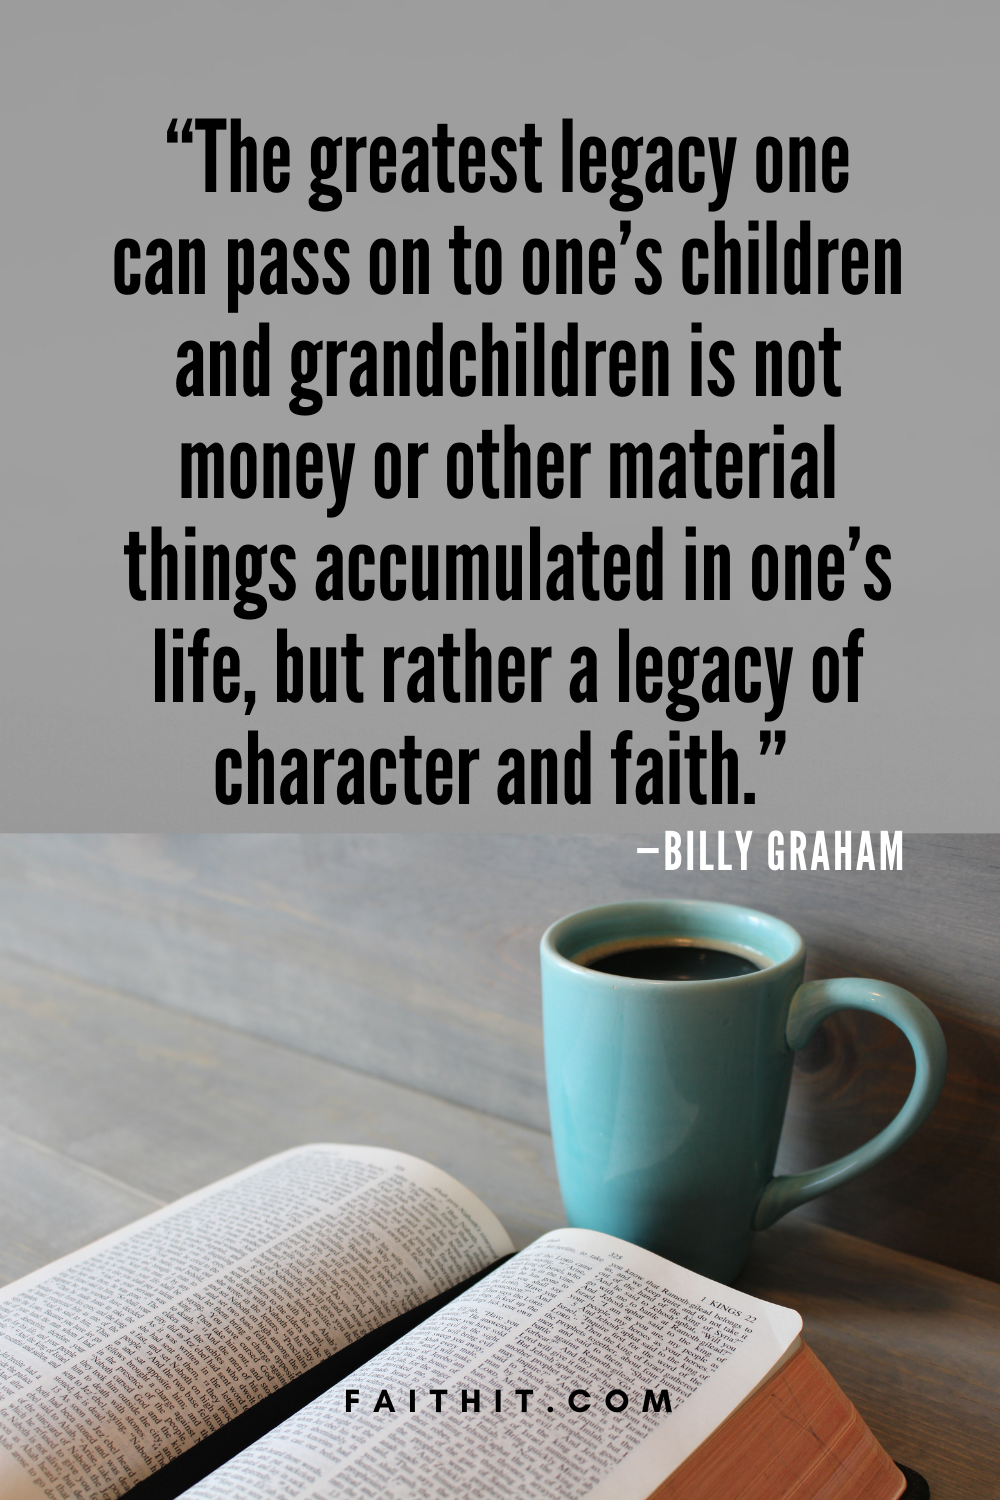 Billy Graham christian quotes